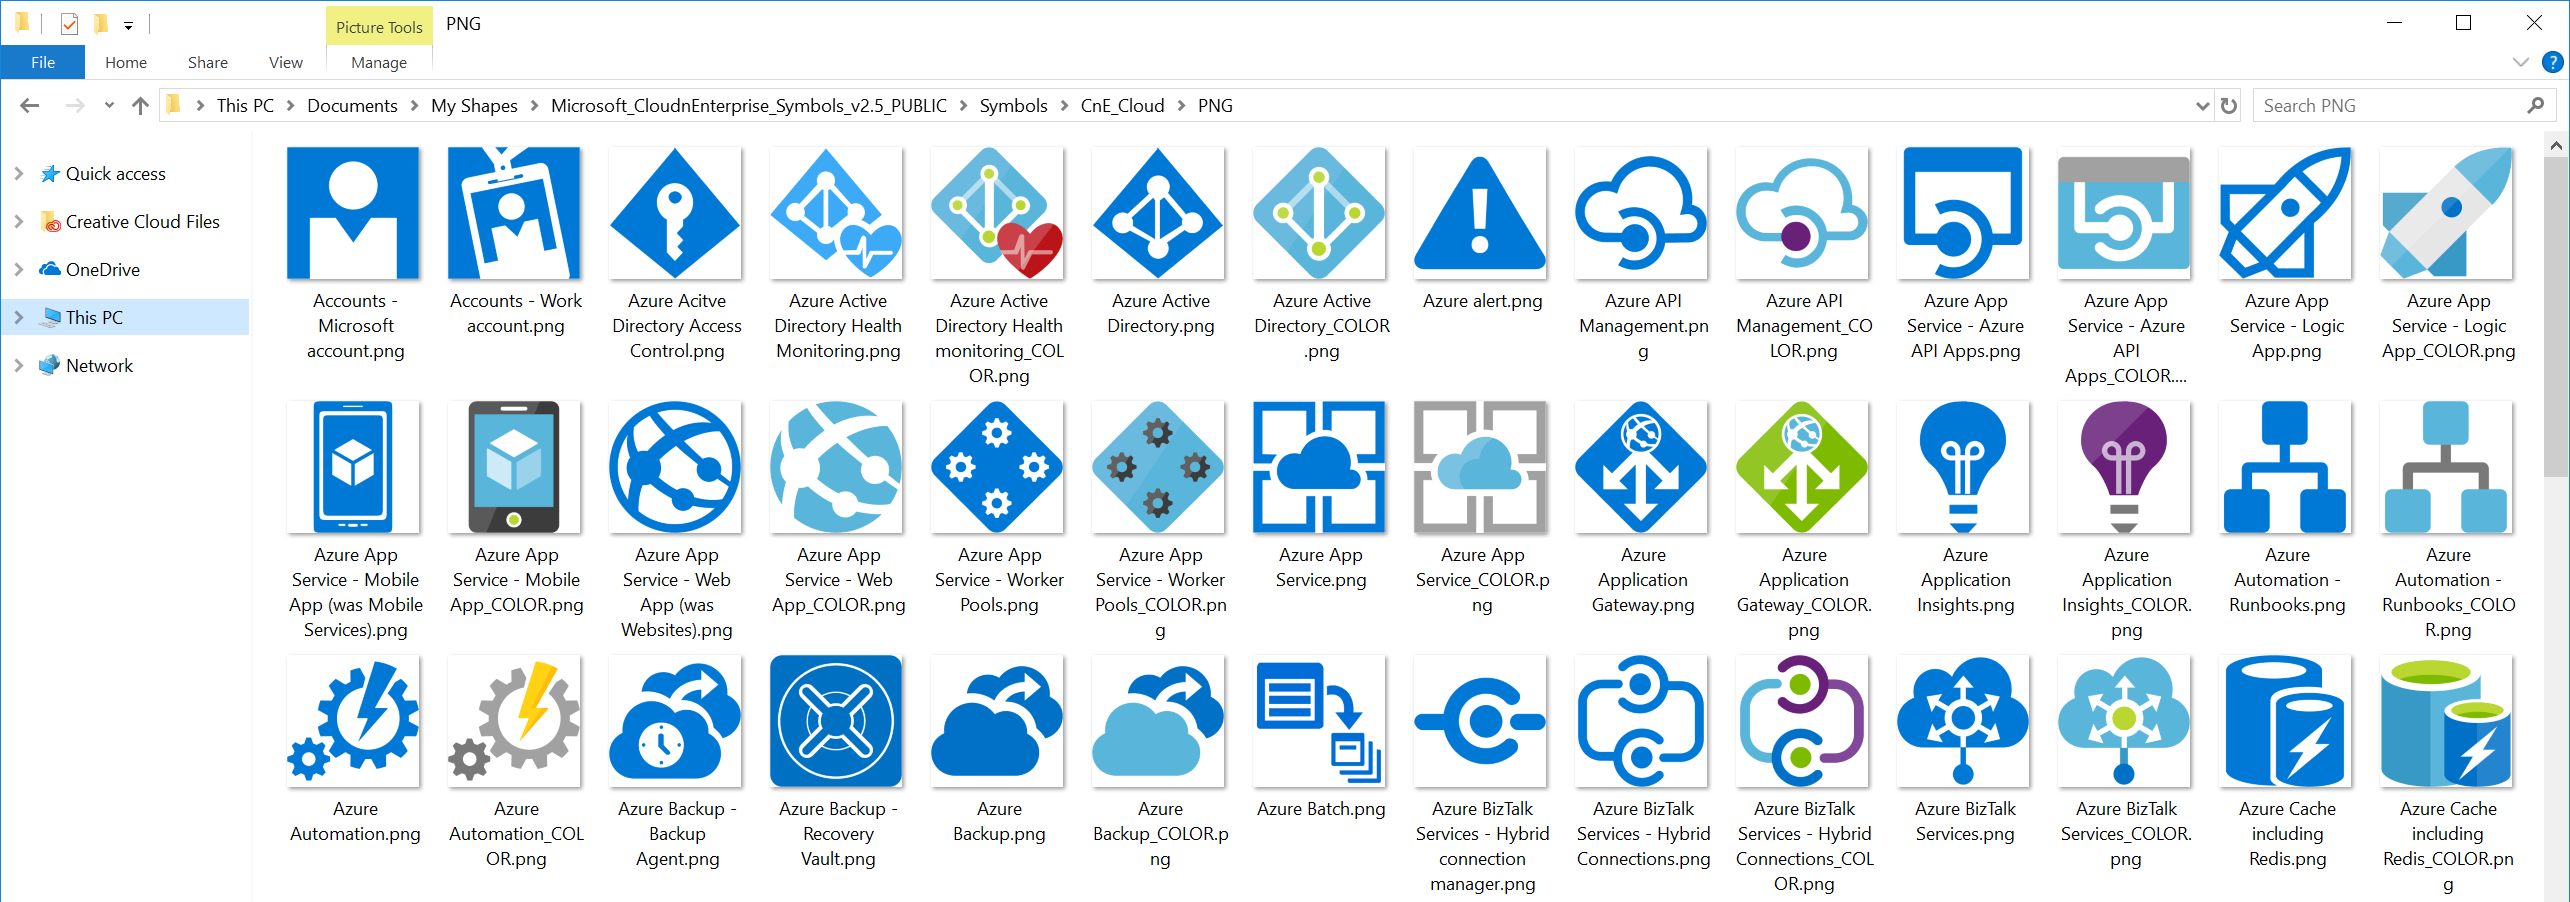 Microsoft Azure Symbol Icon Set Download Visio Stencil Png And Svg By Callon Campbell Medium